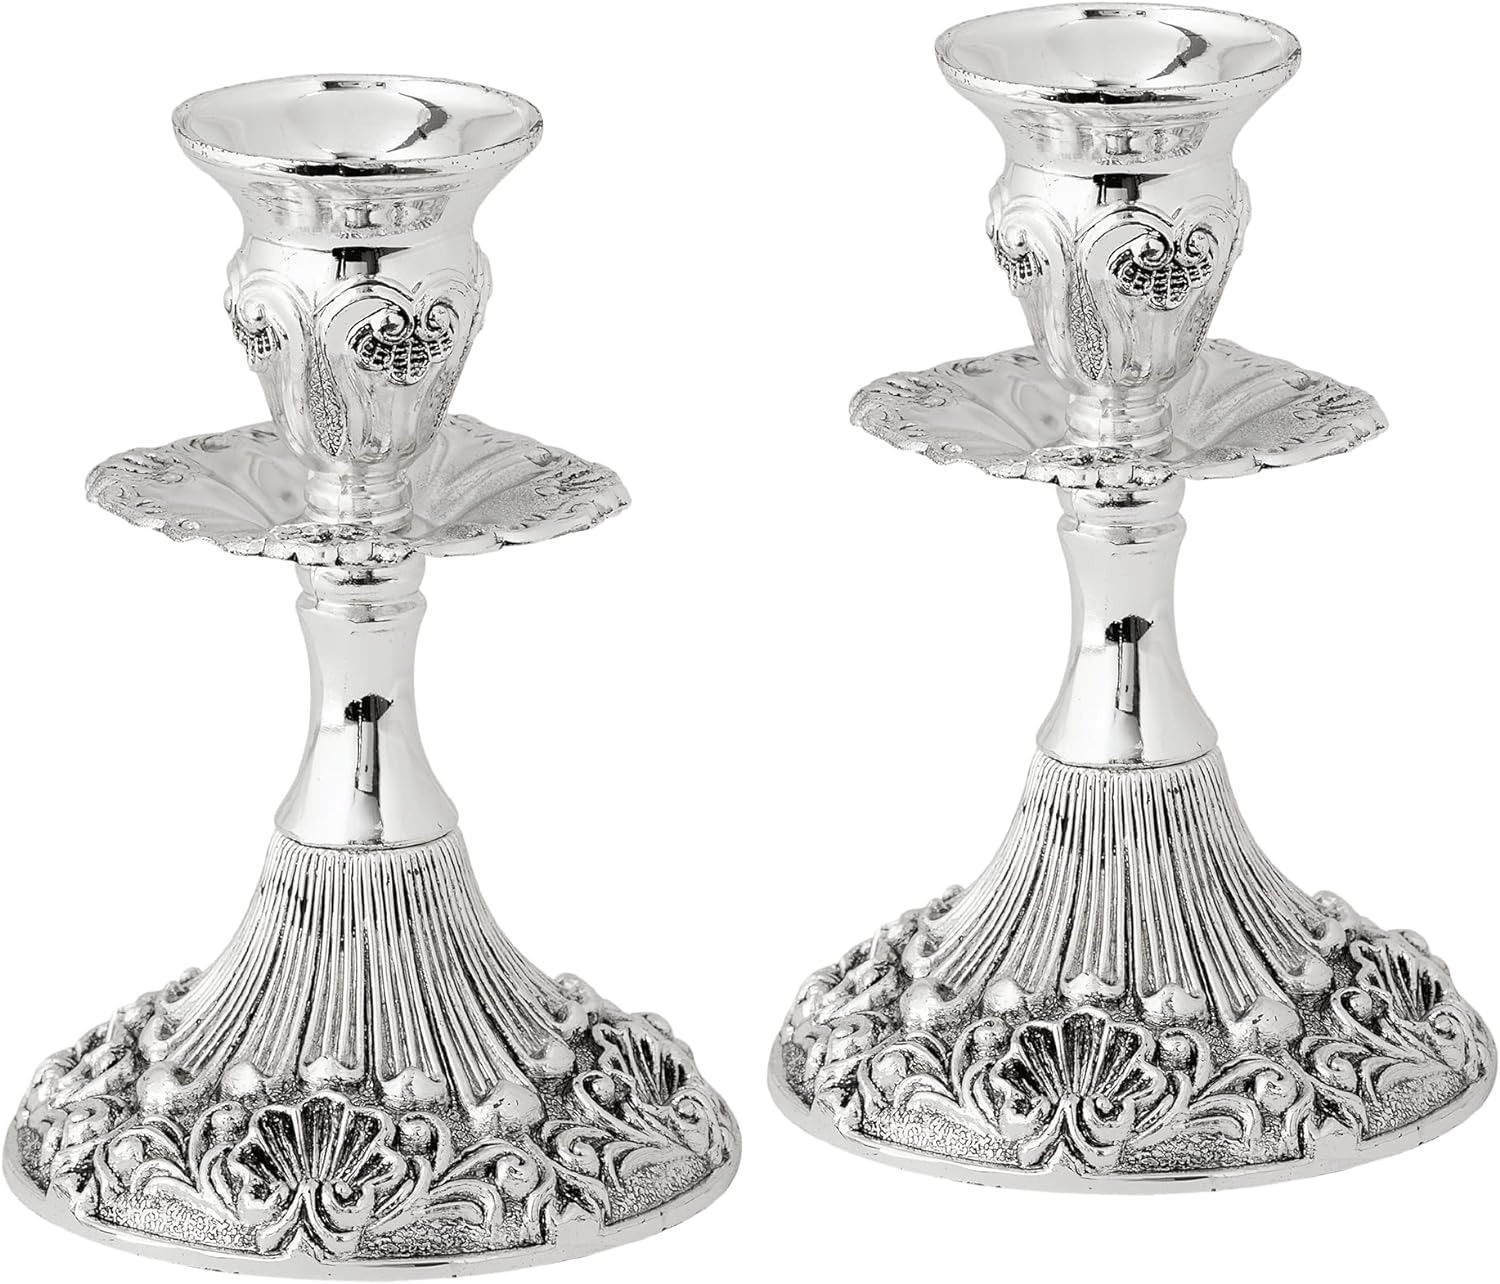 Silver Plated Candlesticks - 2 Pack Set - Pair of 5 Inch Ornate Candle Holders w